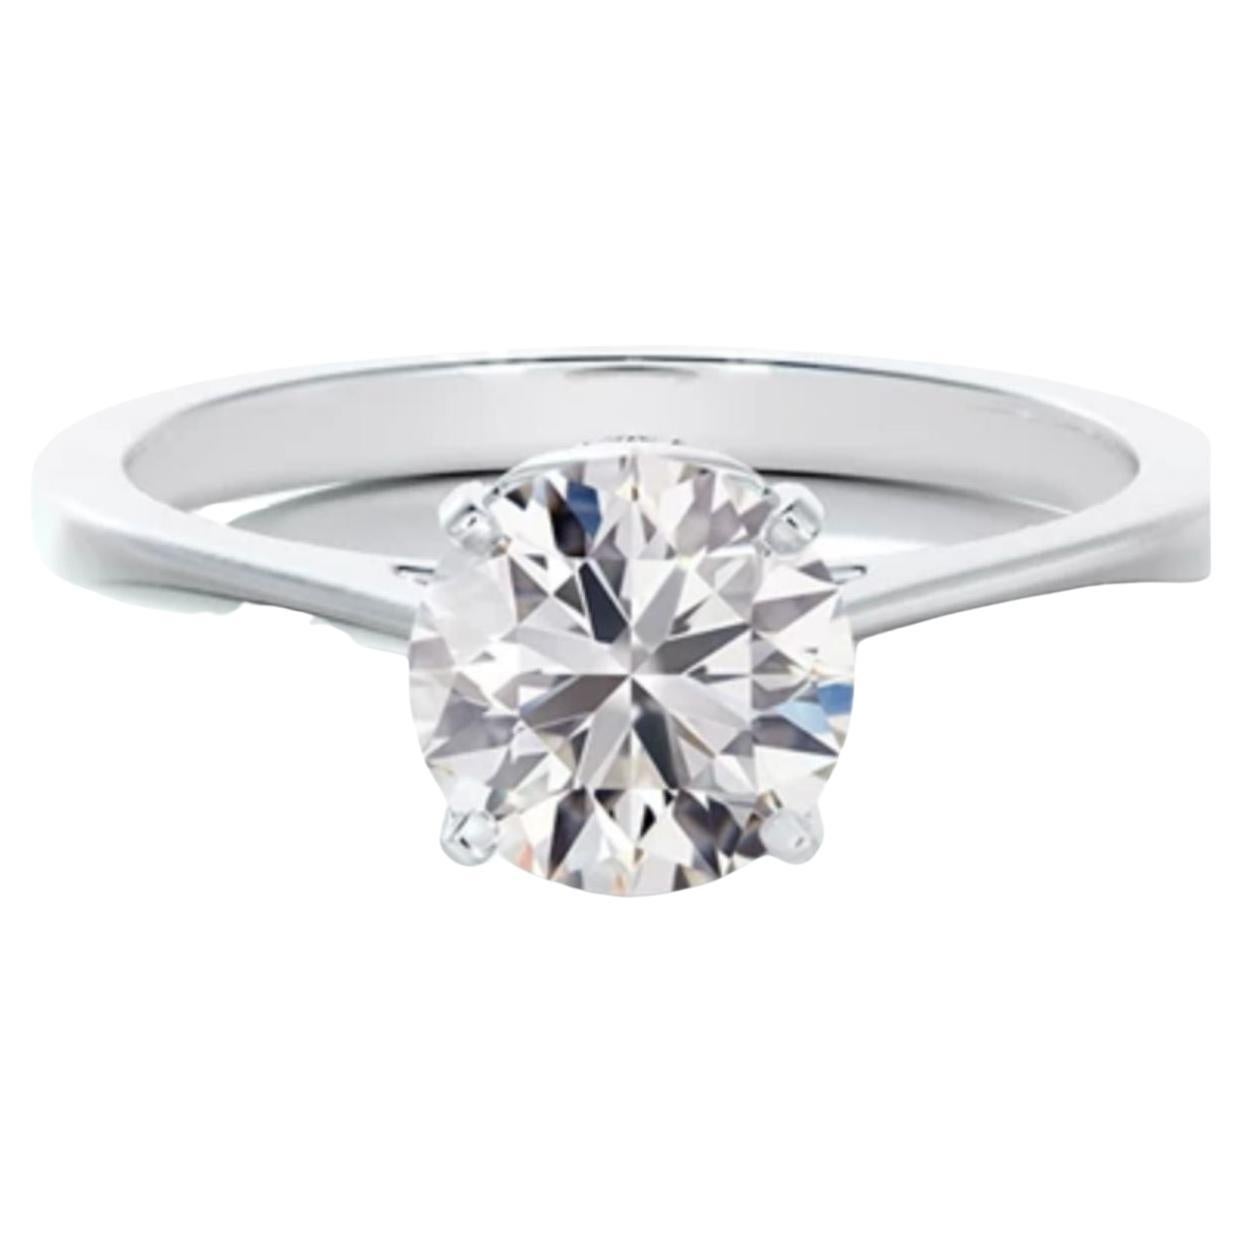 Certified 1.01 Carat Diamond Solitaire Engagement Ring, VS Quality